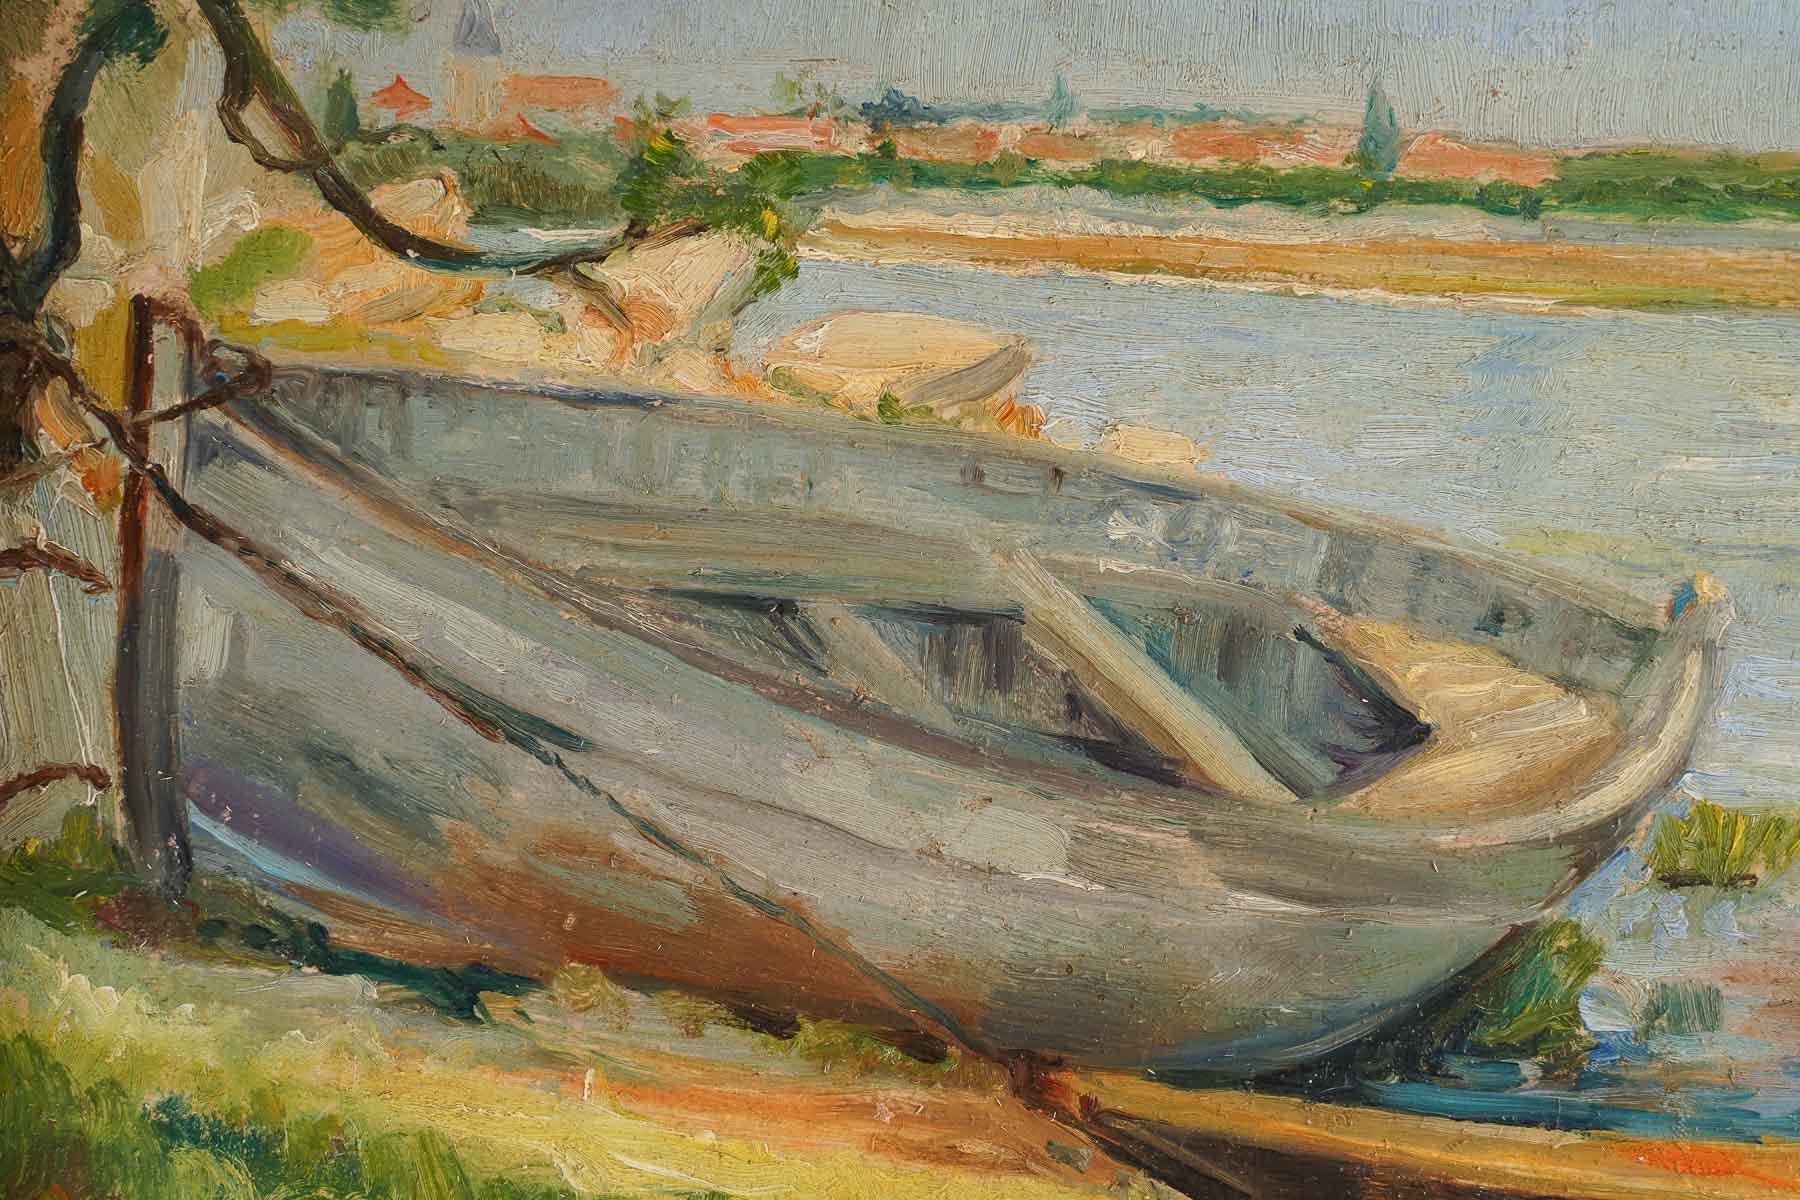 Painting on the theme of the countryside at the water's edge, depicting a boat moored on the shore and two children drying off after taking a bath and drying off in the sun.
Oil on canvas signed by Dante Donzelli lower left.

Dante Donzelli: